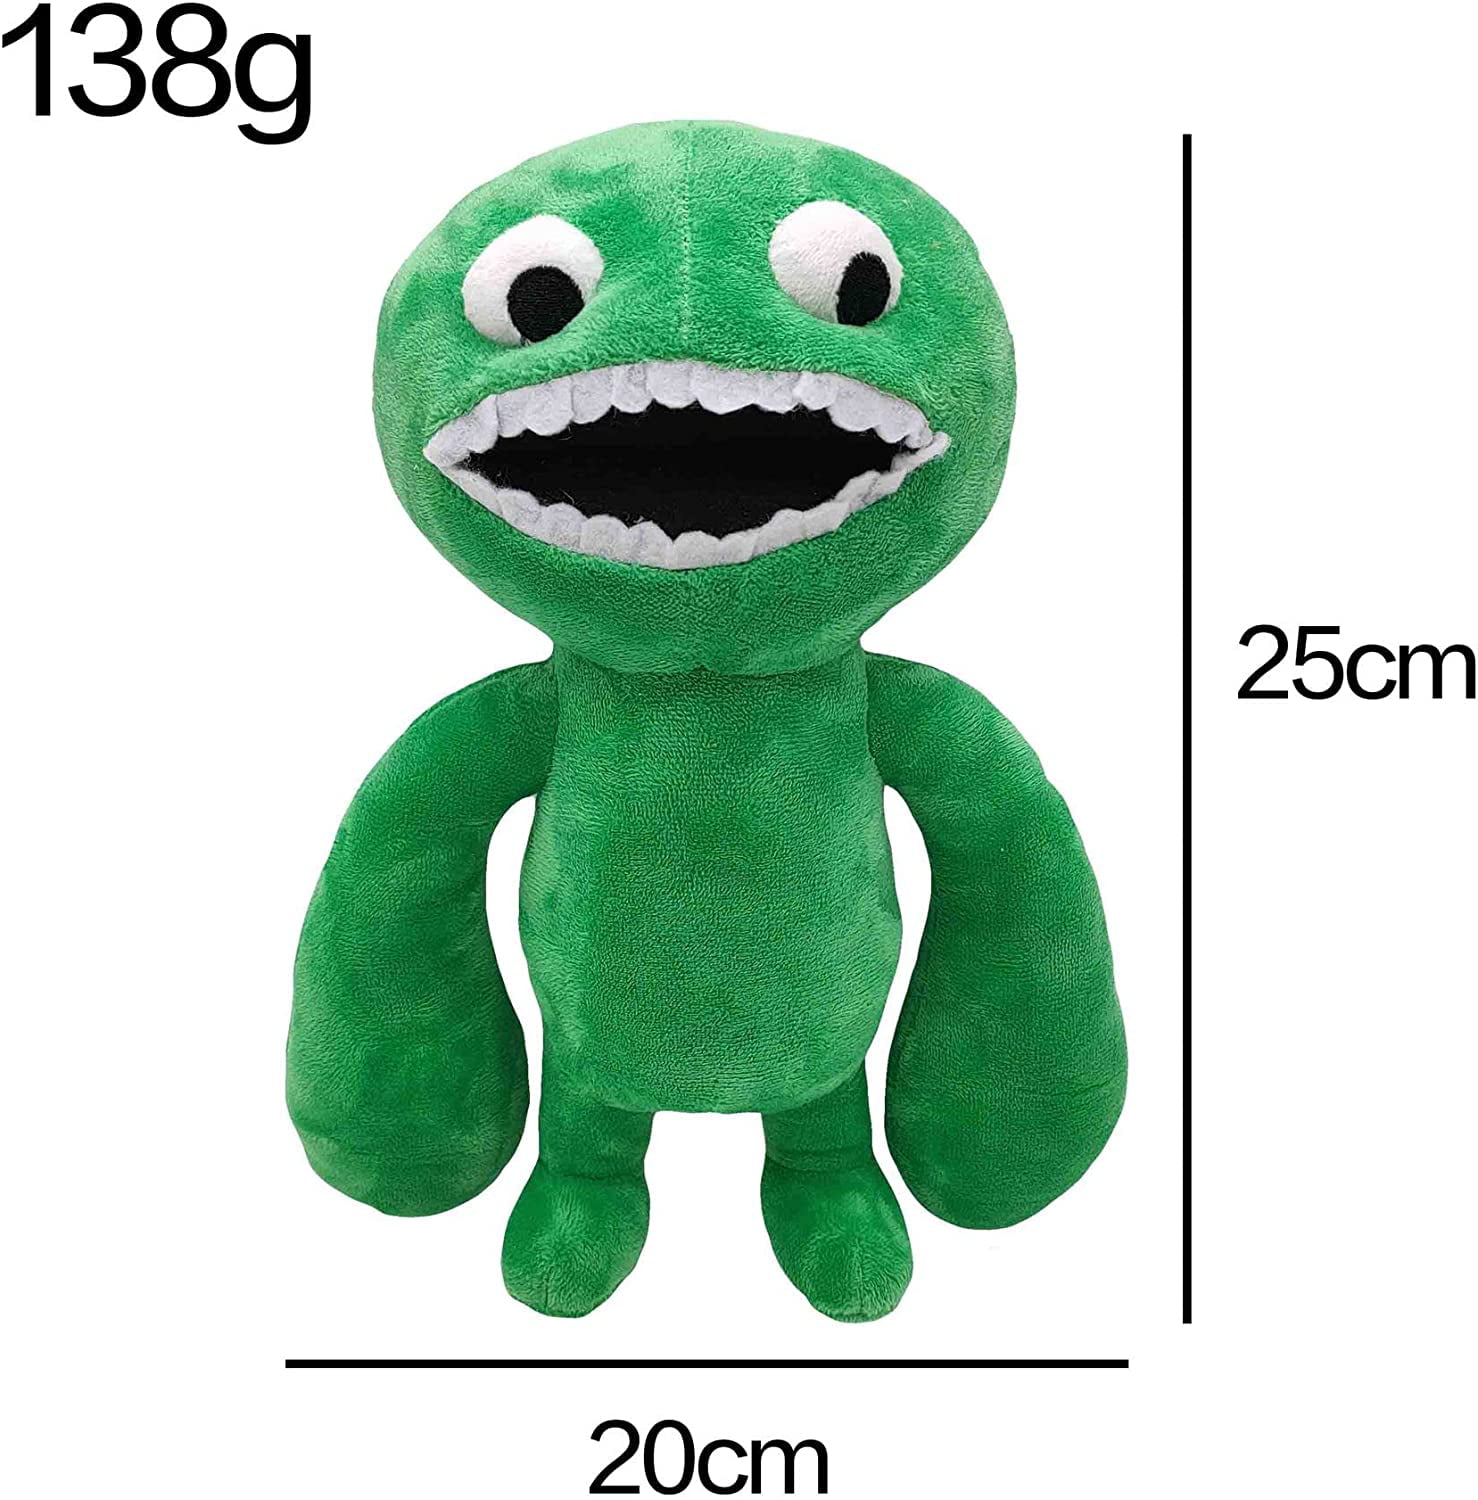  OVITTAC Garten of Banban Plush,10 inches Garden of Banban Jumbo  Josh Plushies Toys,Garten of Ban ban Plushies,Birthday Party Favours : Toys  & Games